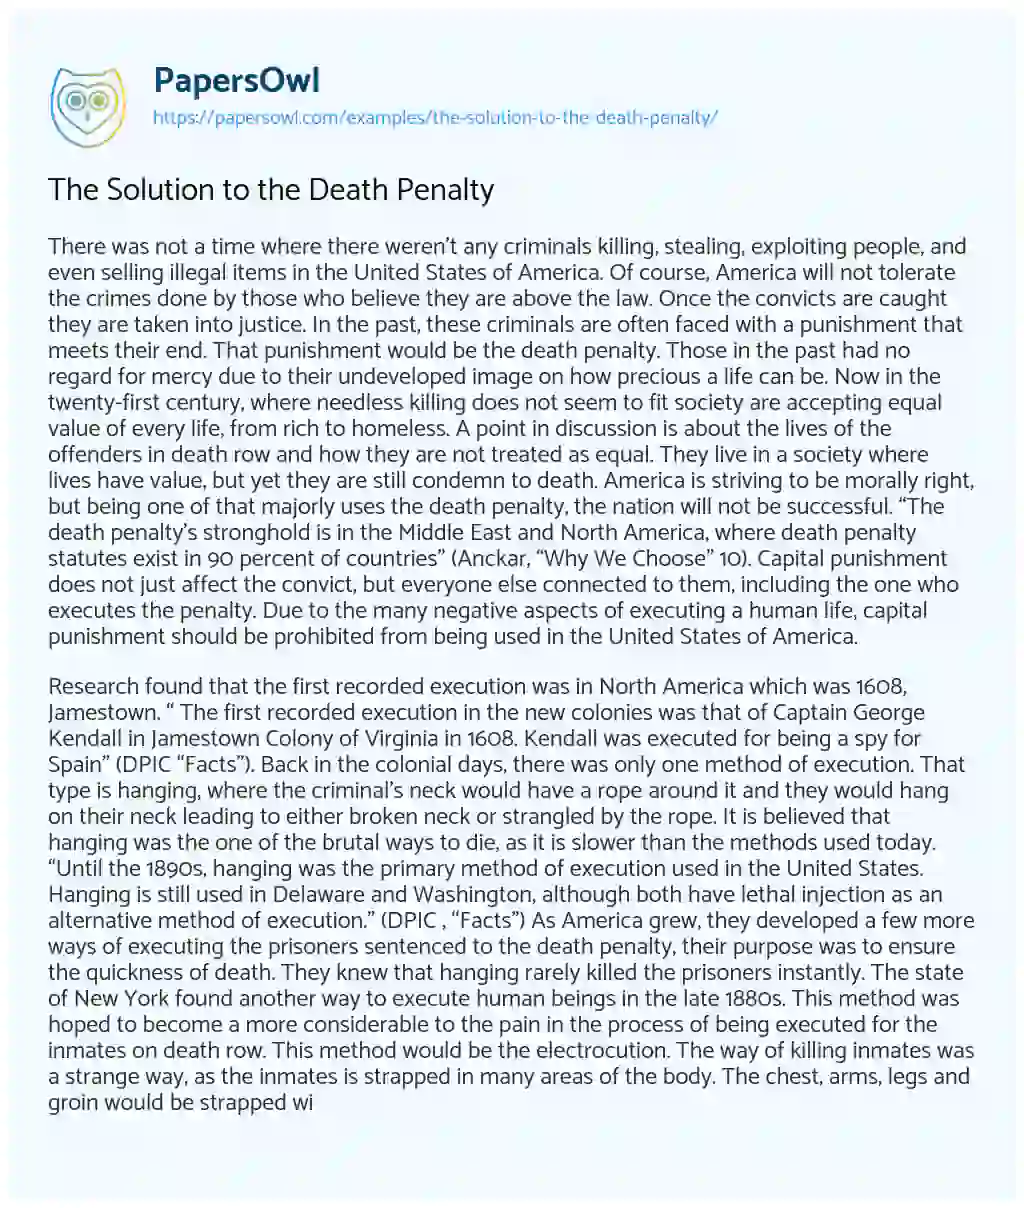 Essay on The Solution to the Death Penalty